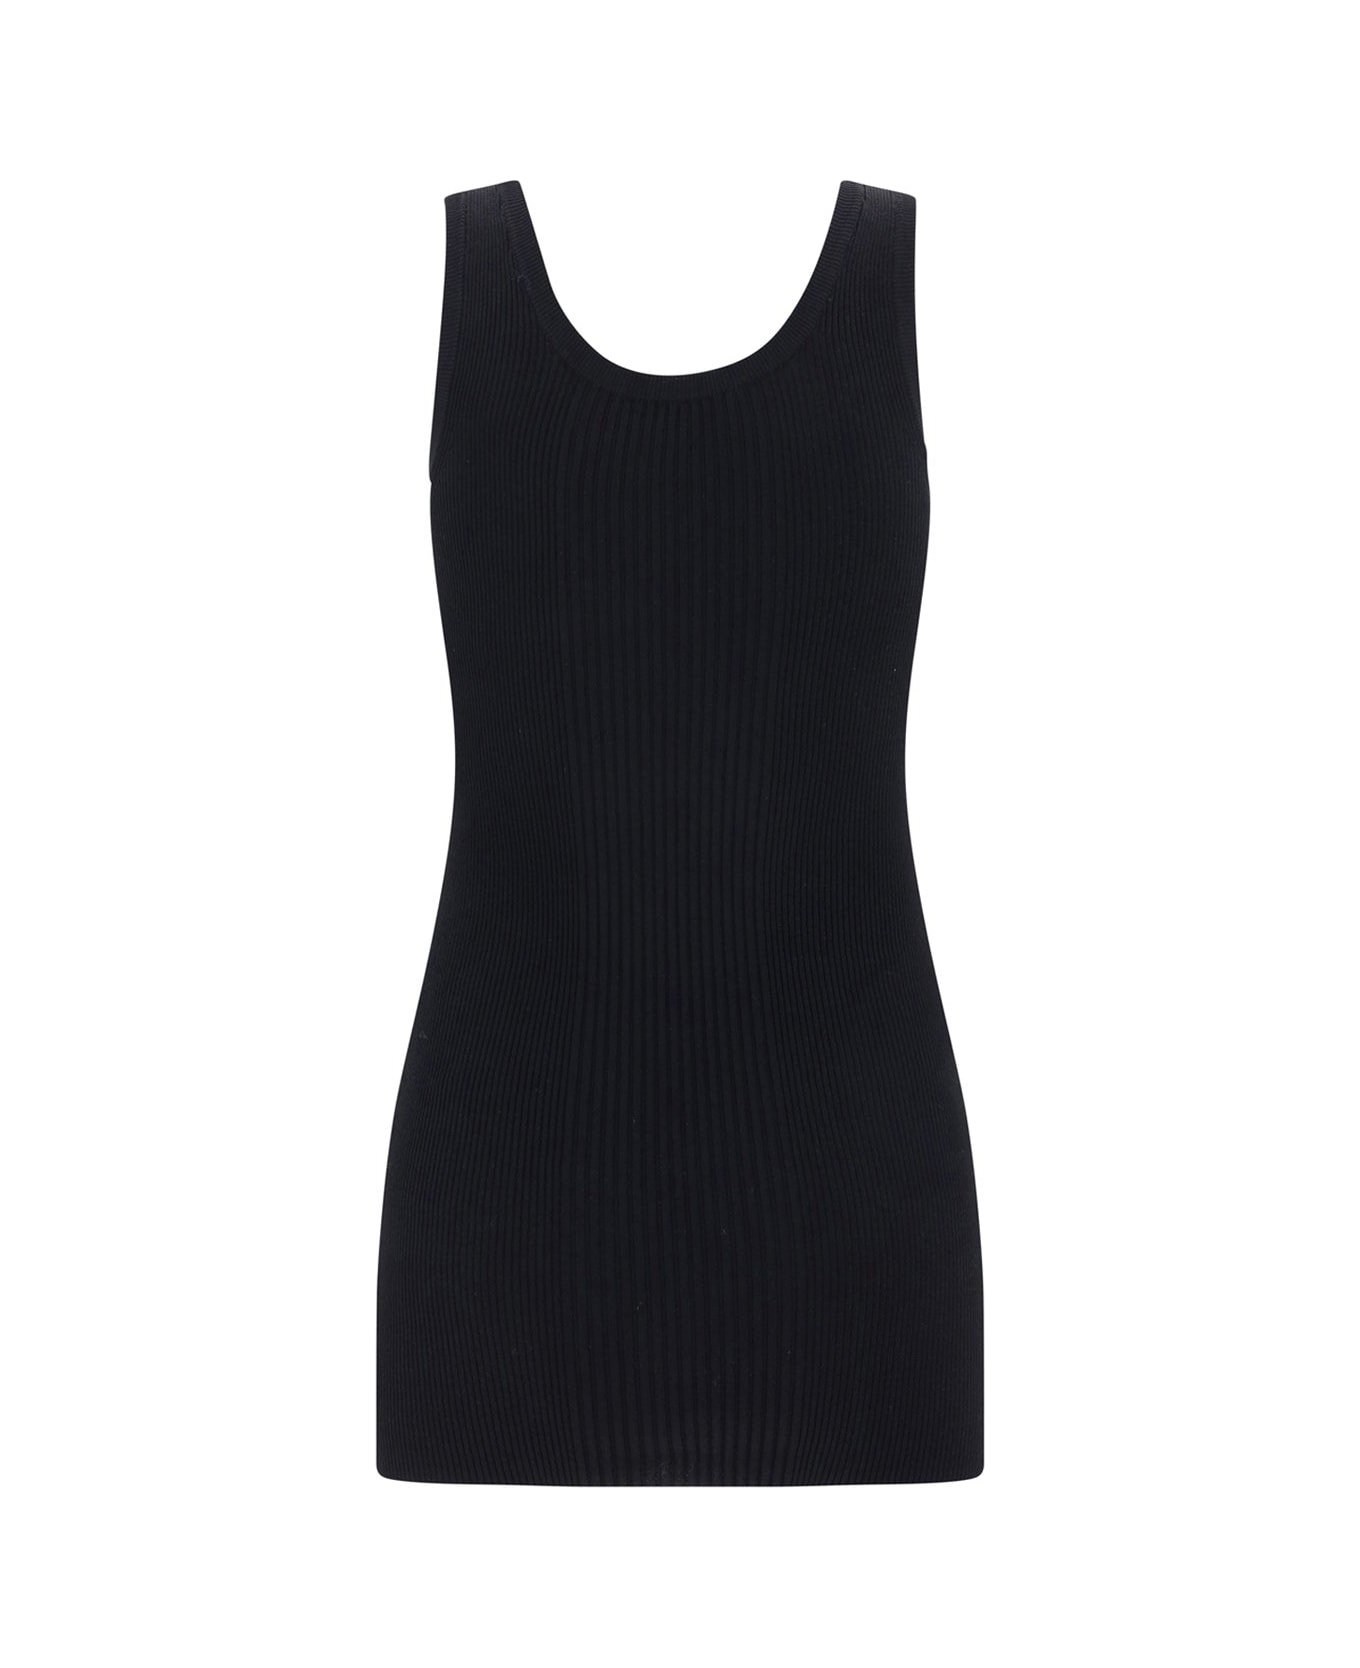 Gucci Ribbed Stretch Top - Black タンクトップ